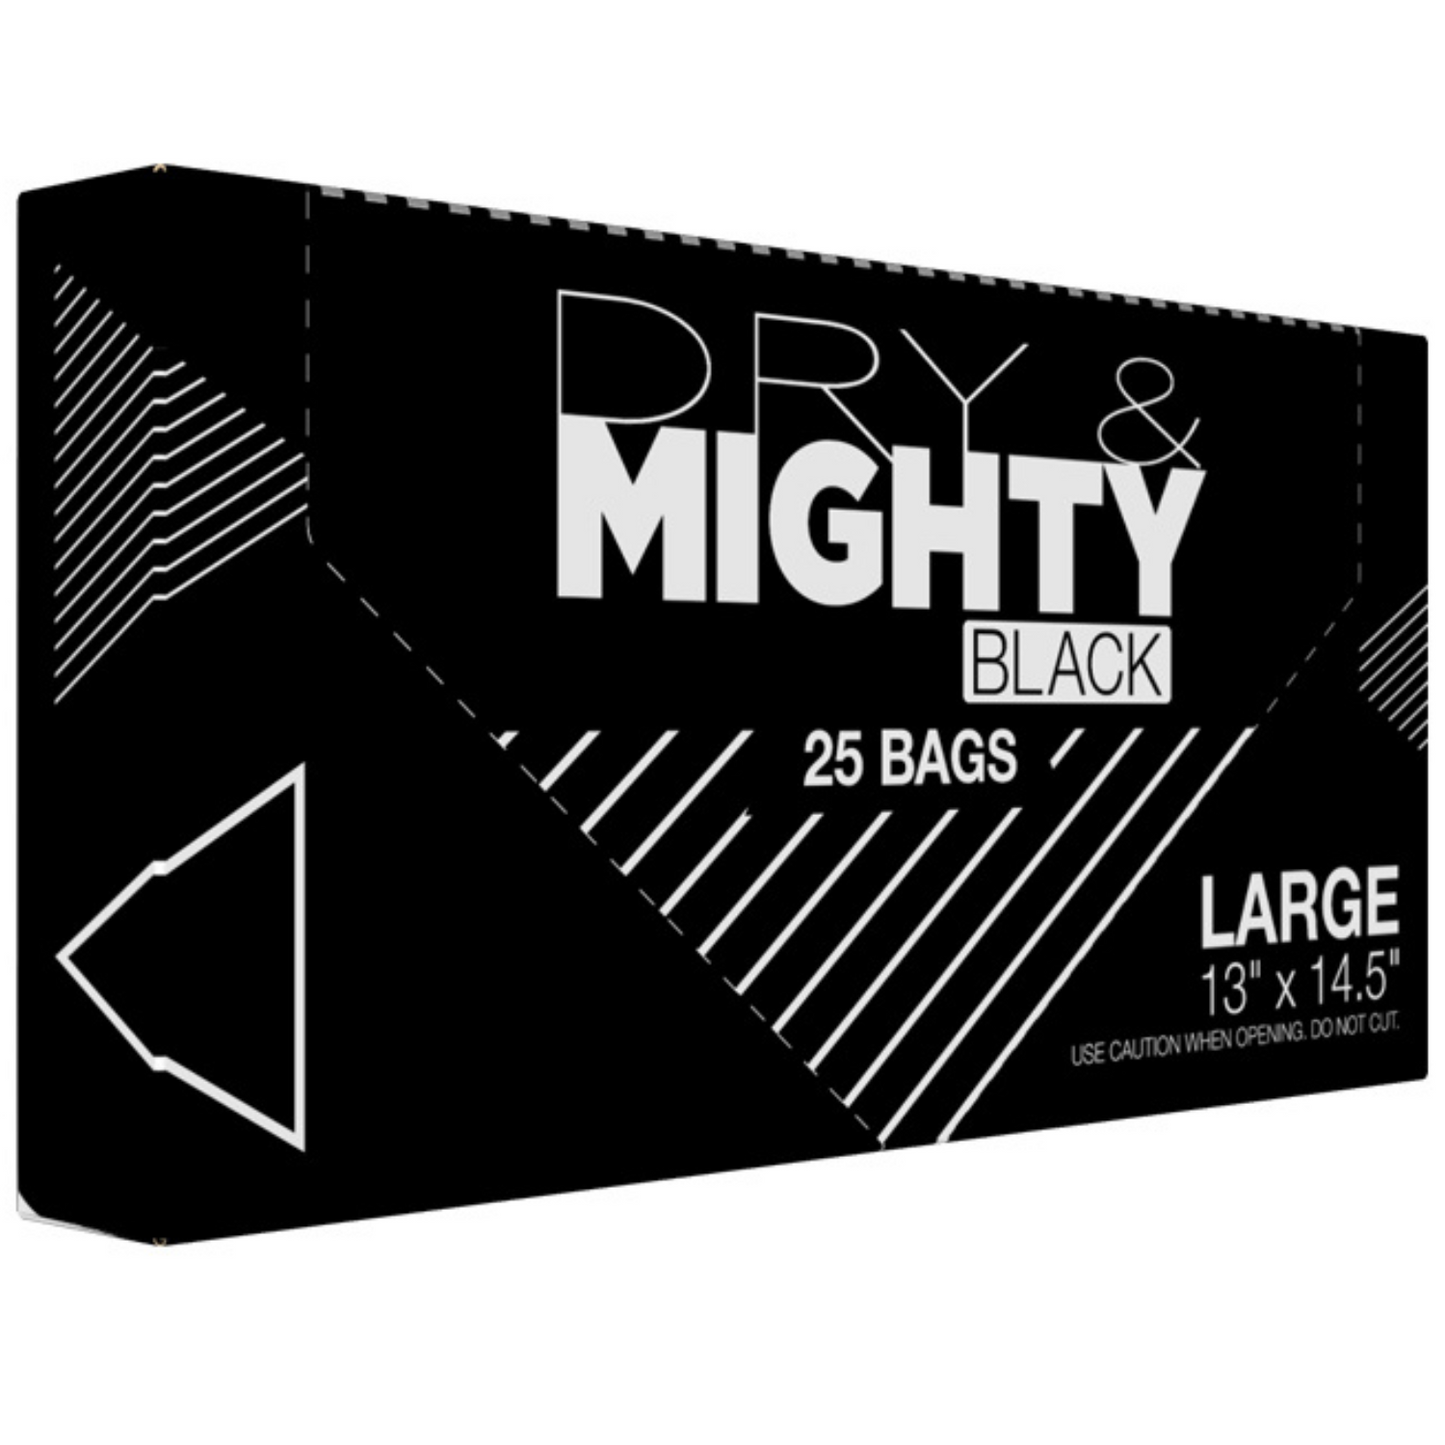 Dry & Mighty Black Bags Large 25 Pack